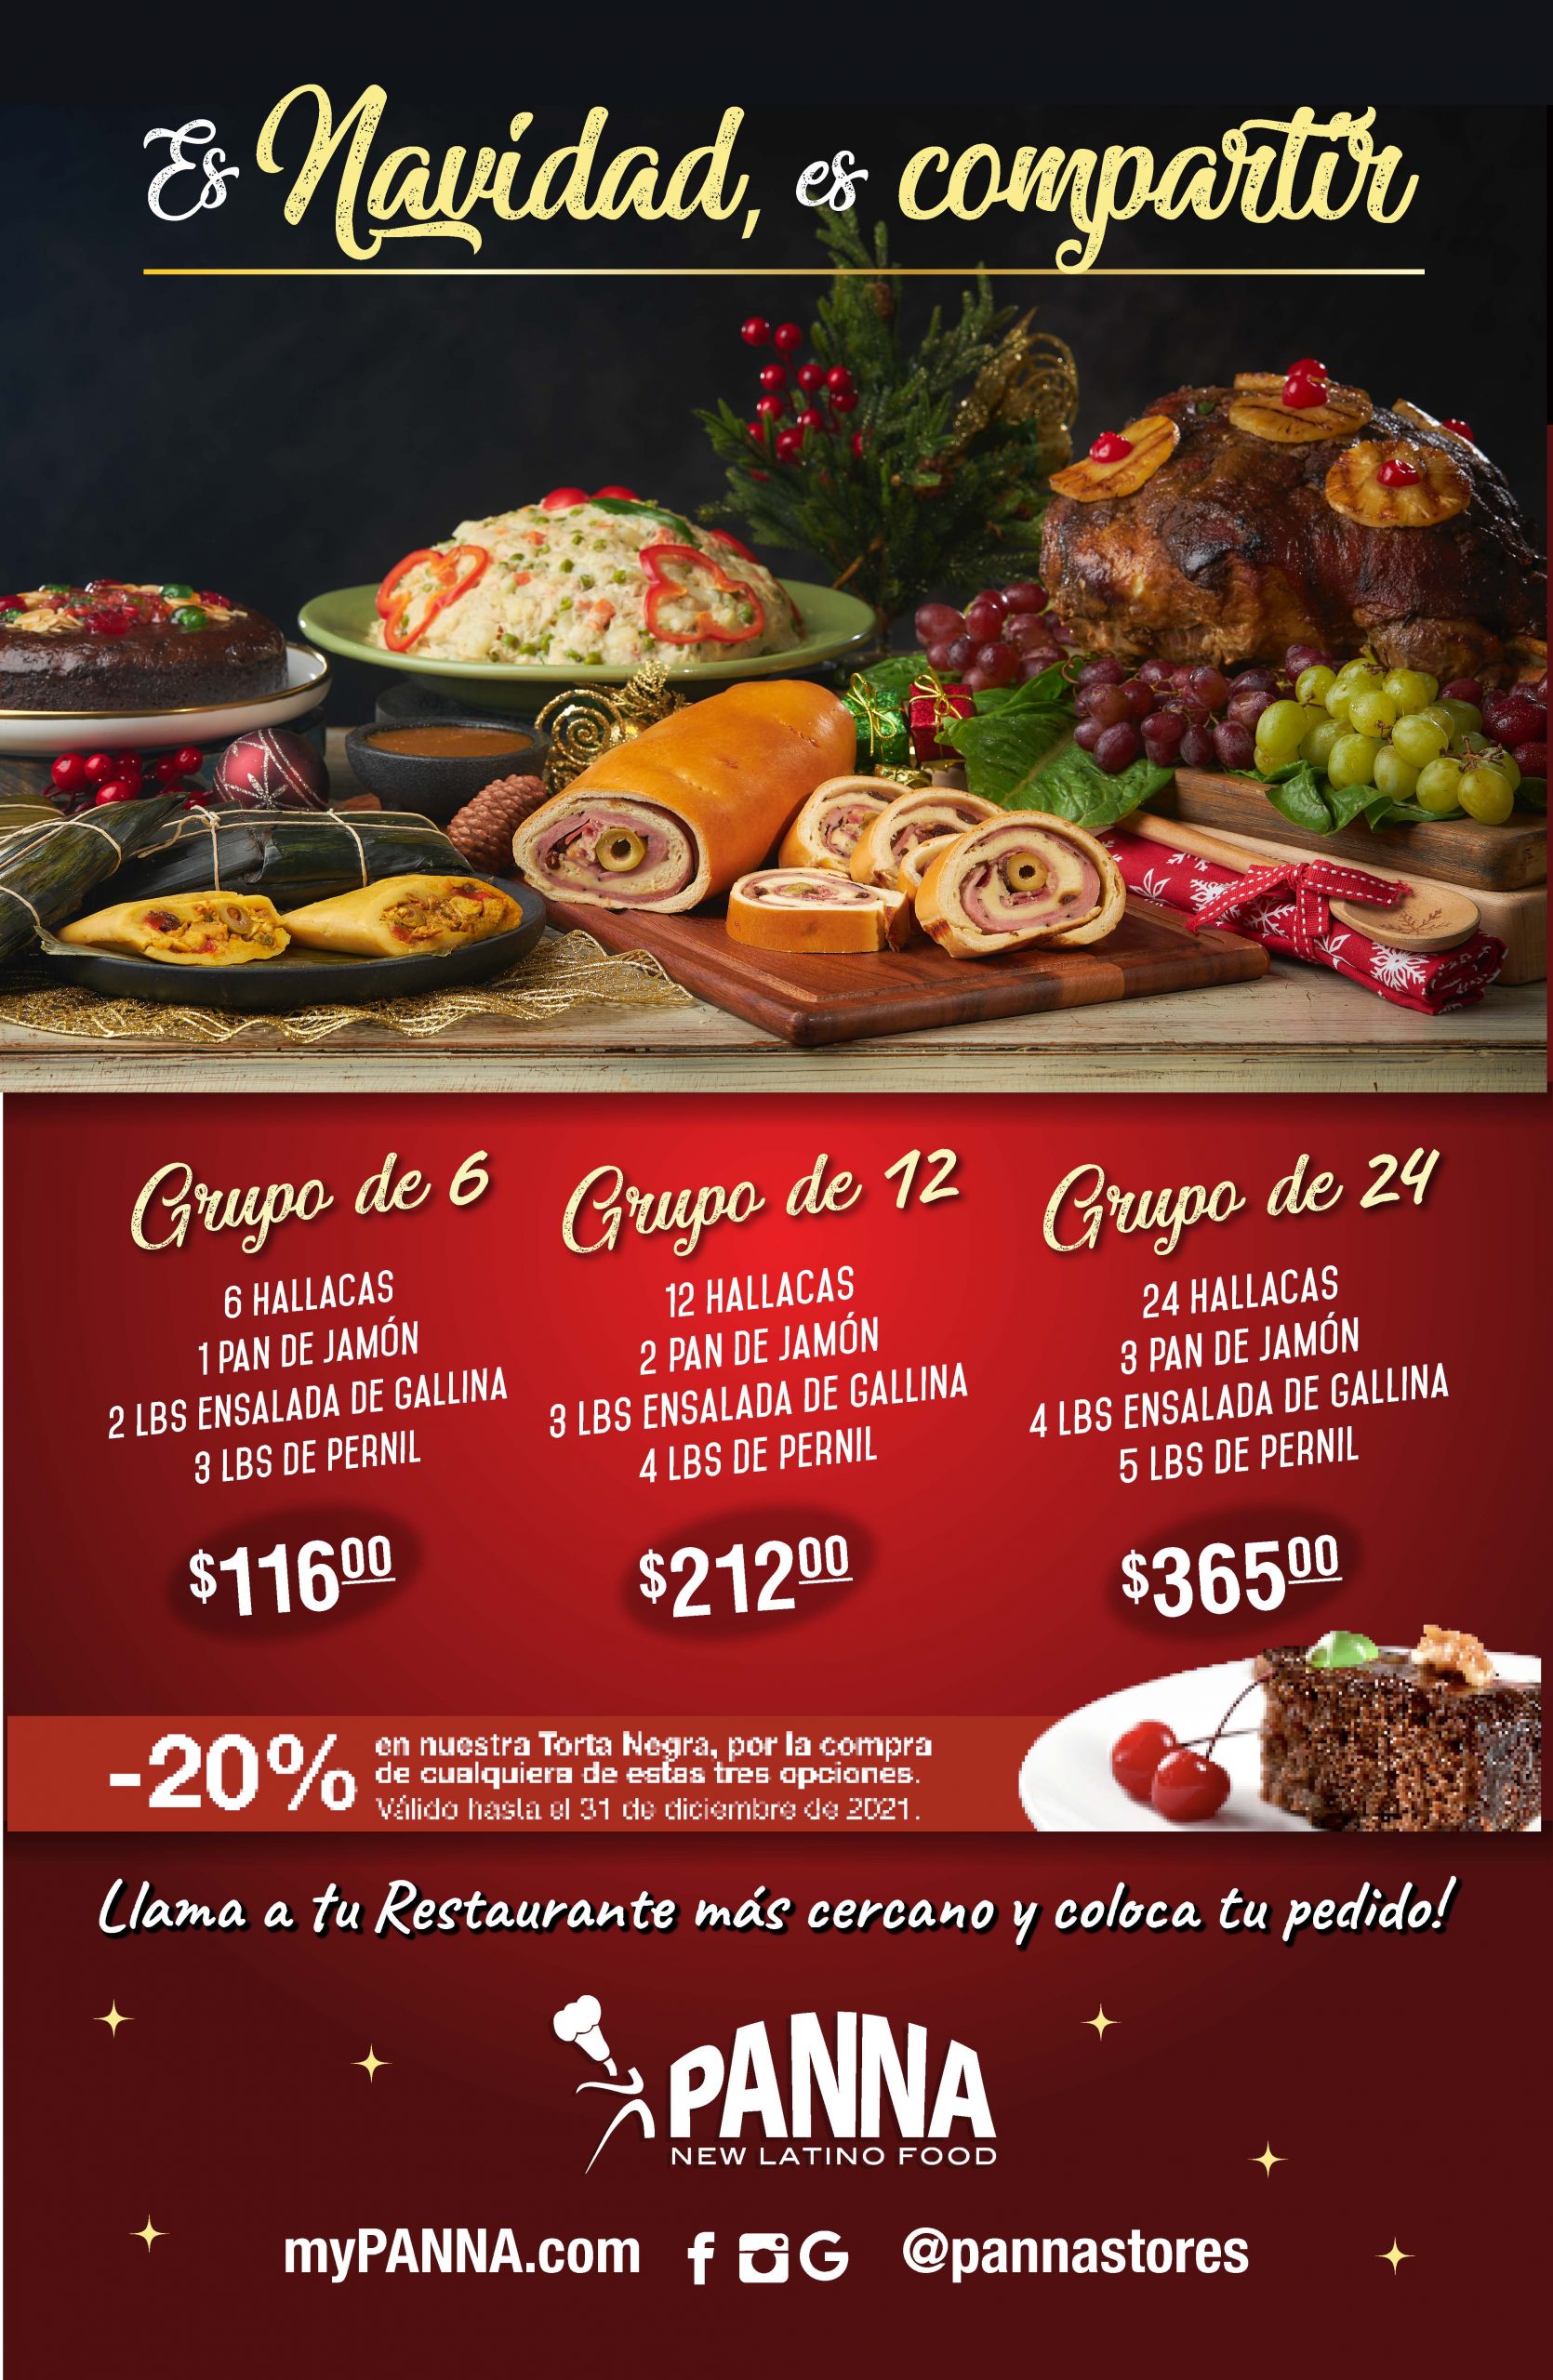 PANNA Reserve your Christmas Combo by calling Panna Doral at (305) 614-0202 until December 23rd